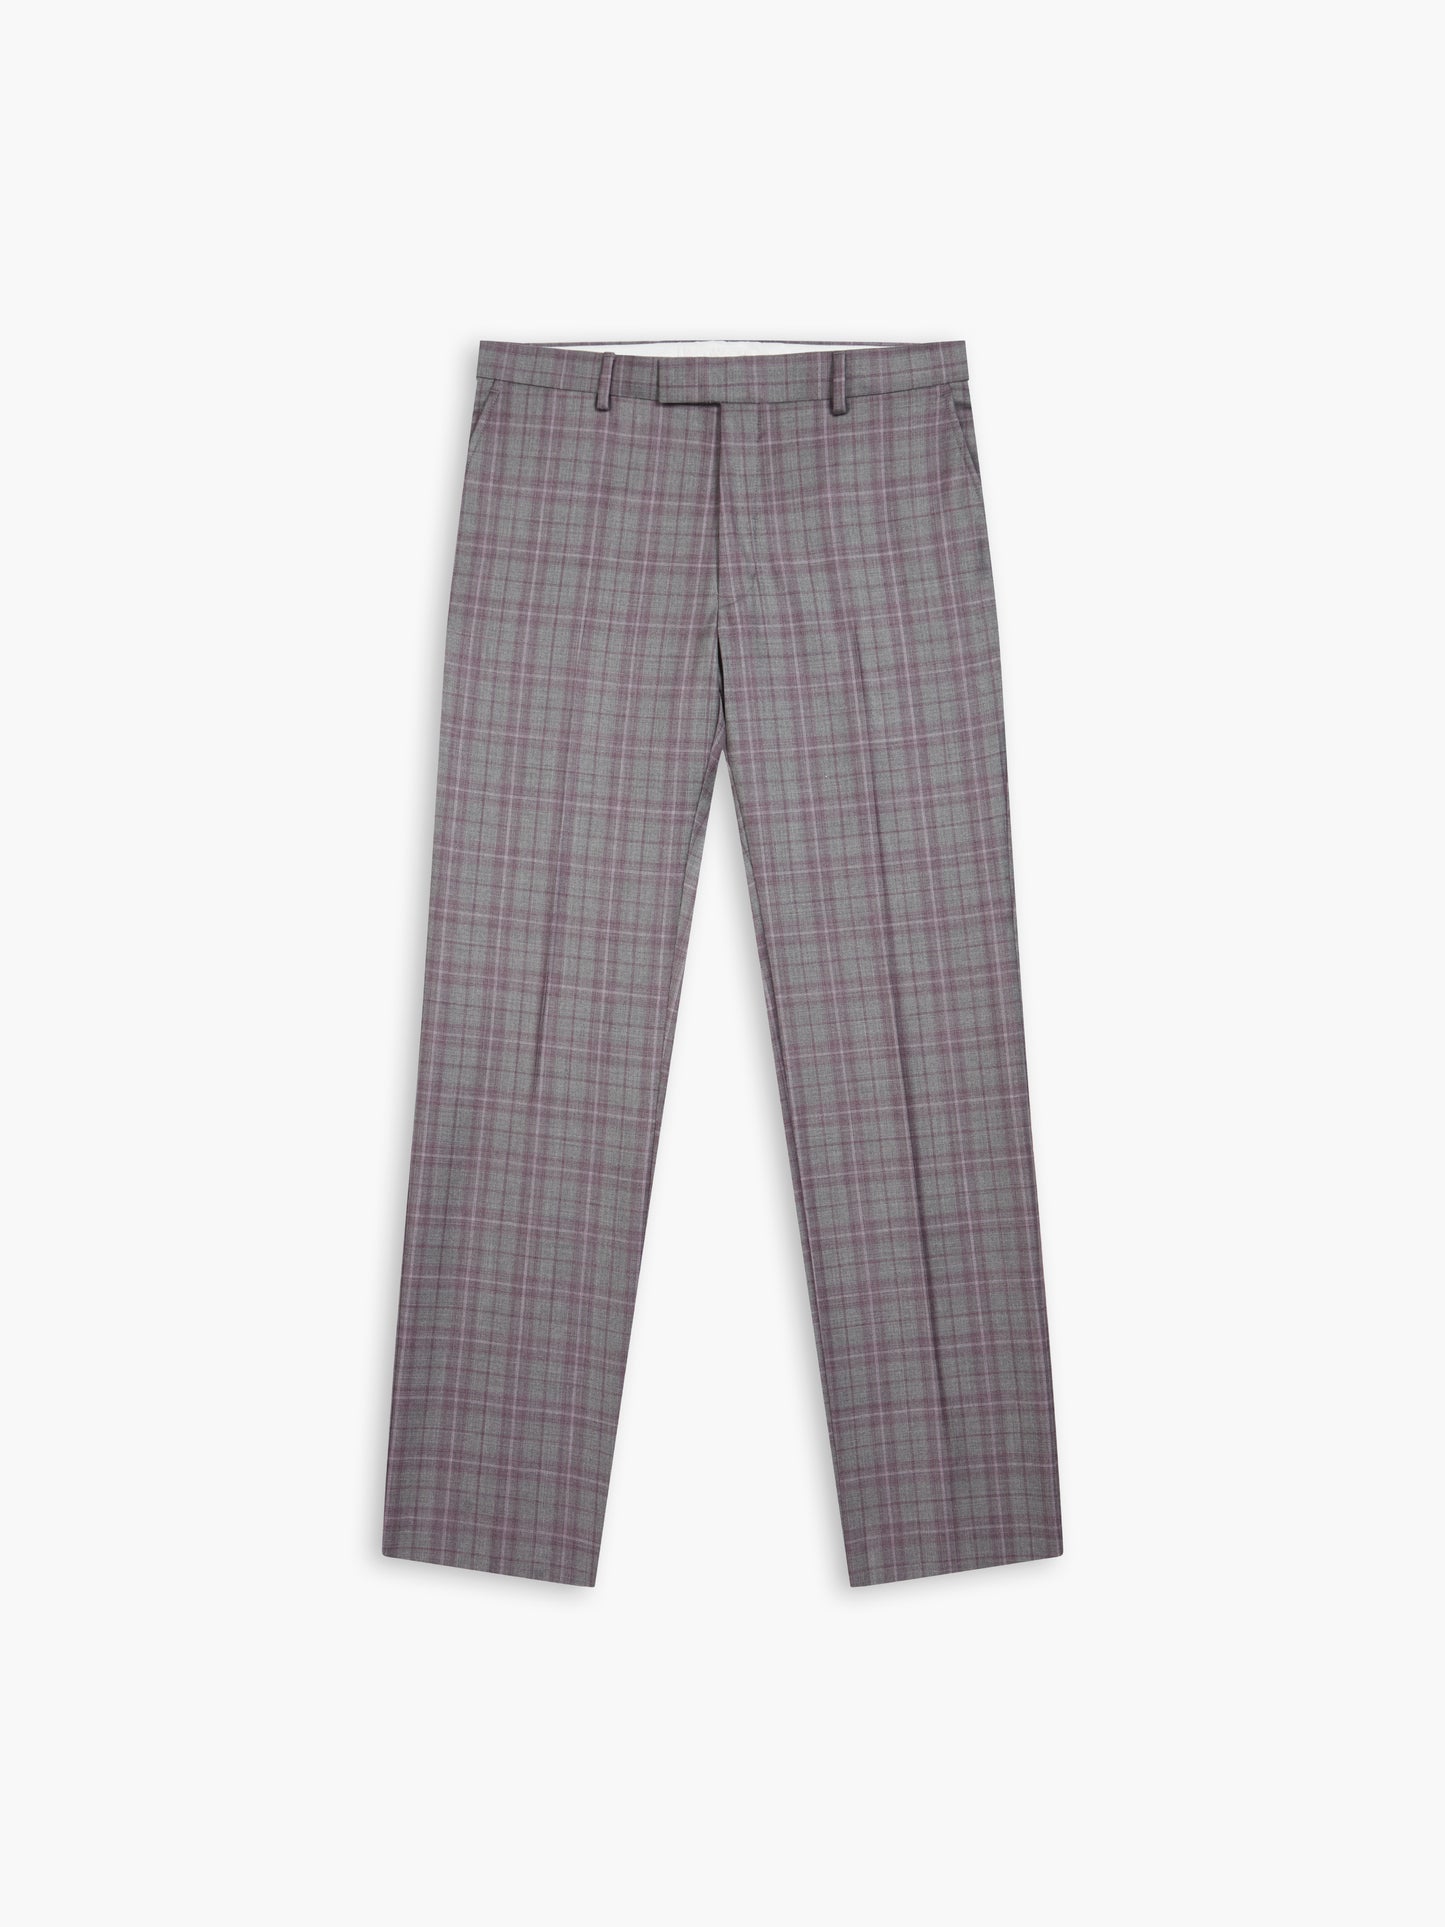 Highgrove Woven in Italy Slim Fit Grey Check Trousers